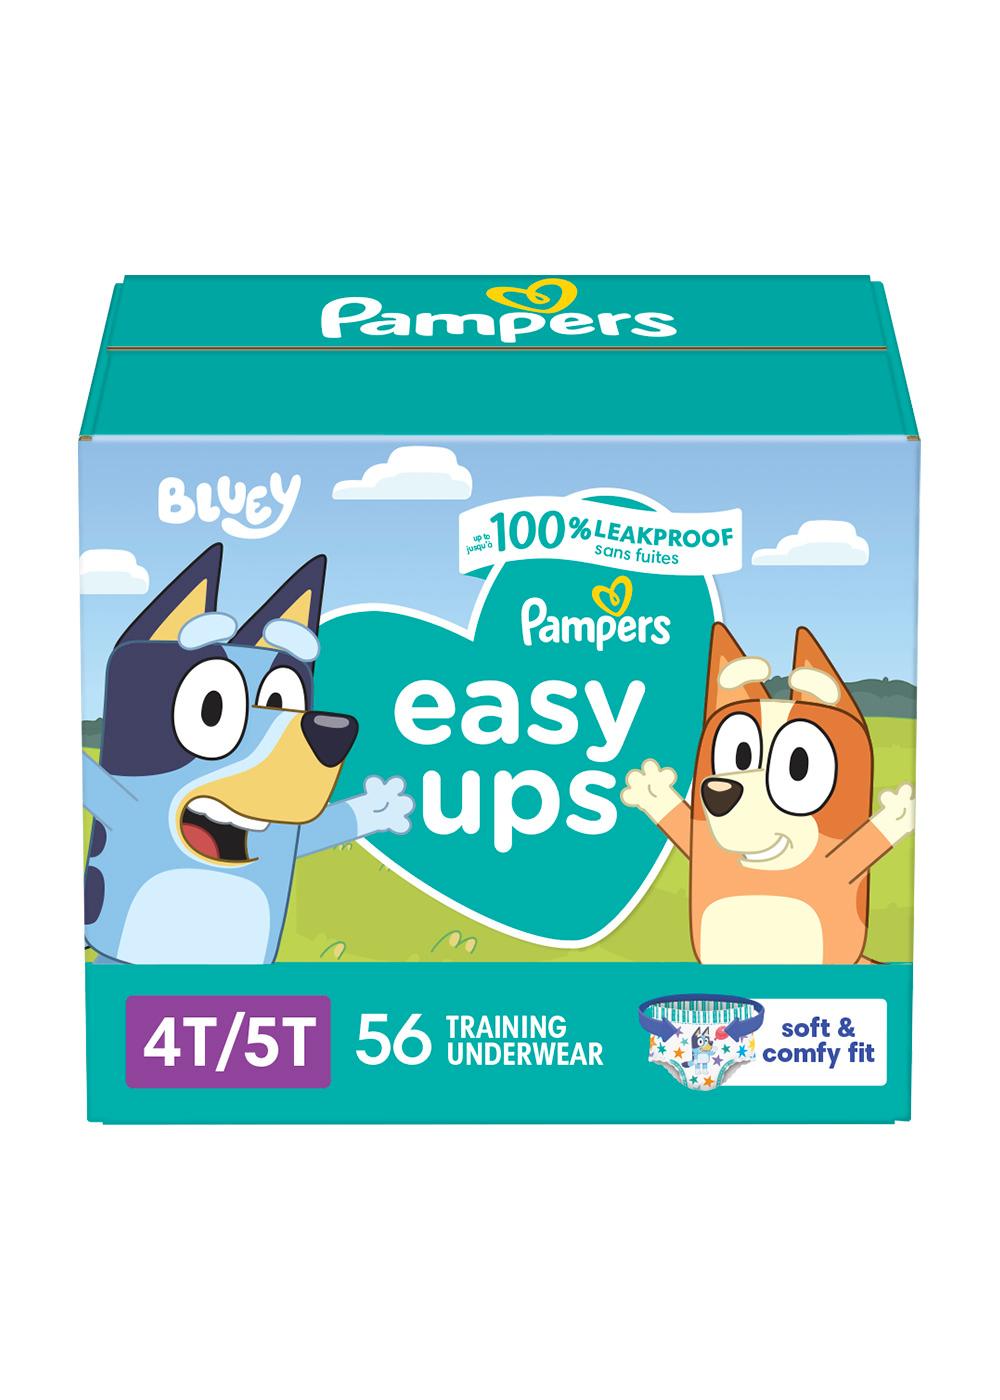 Pampers Easy Ups Boys Training Underwear - 4T - 5T - Shop Training